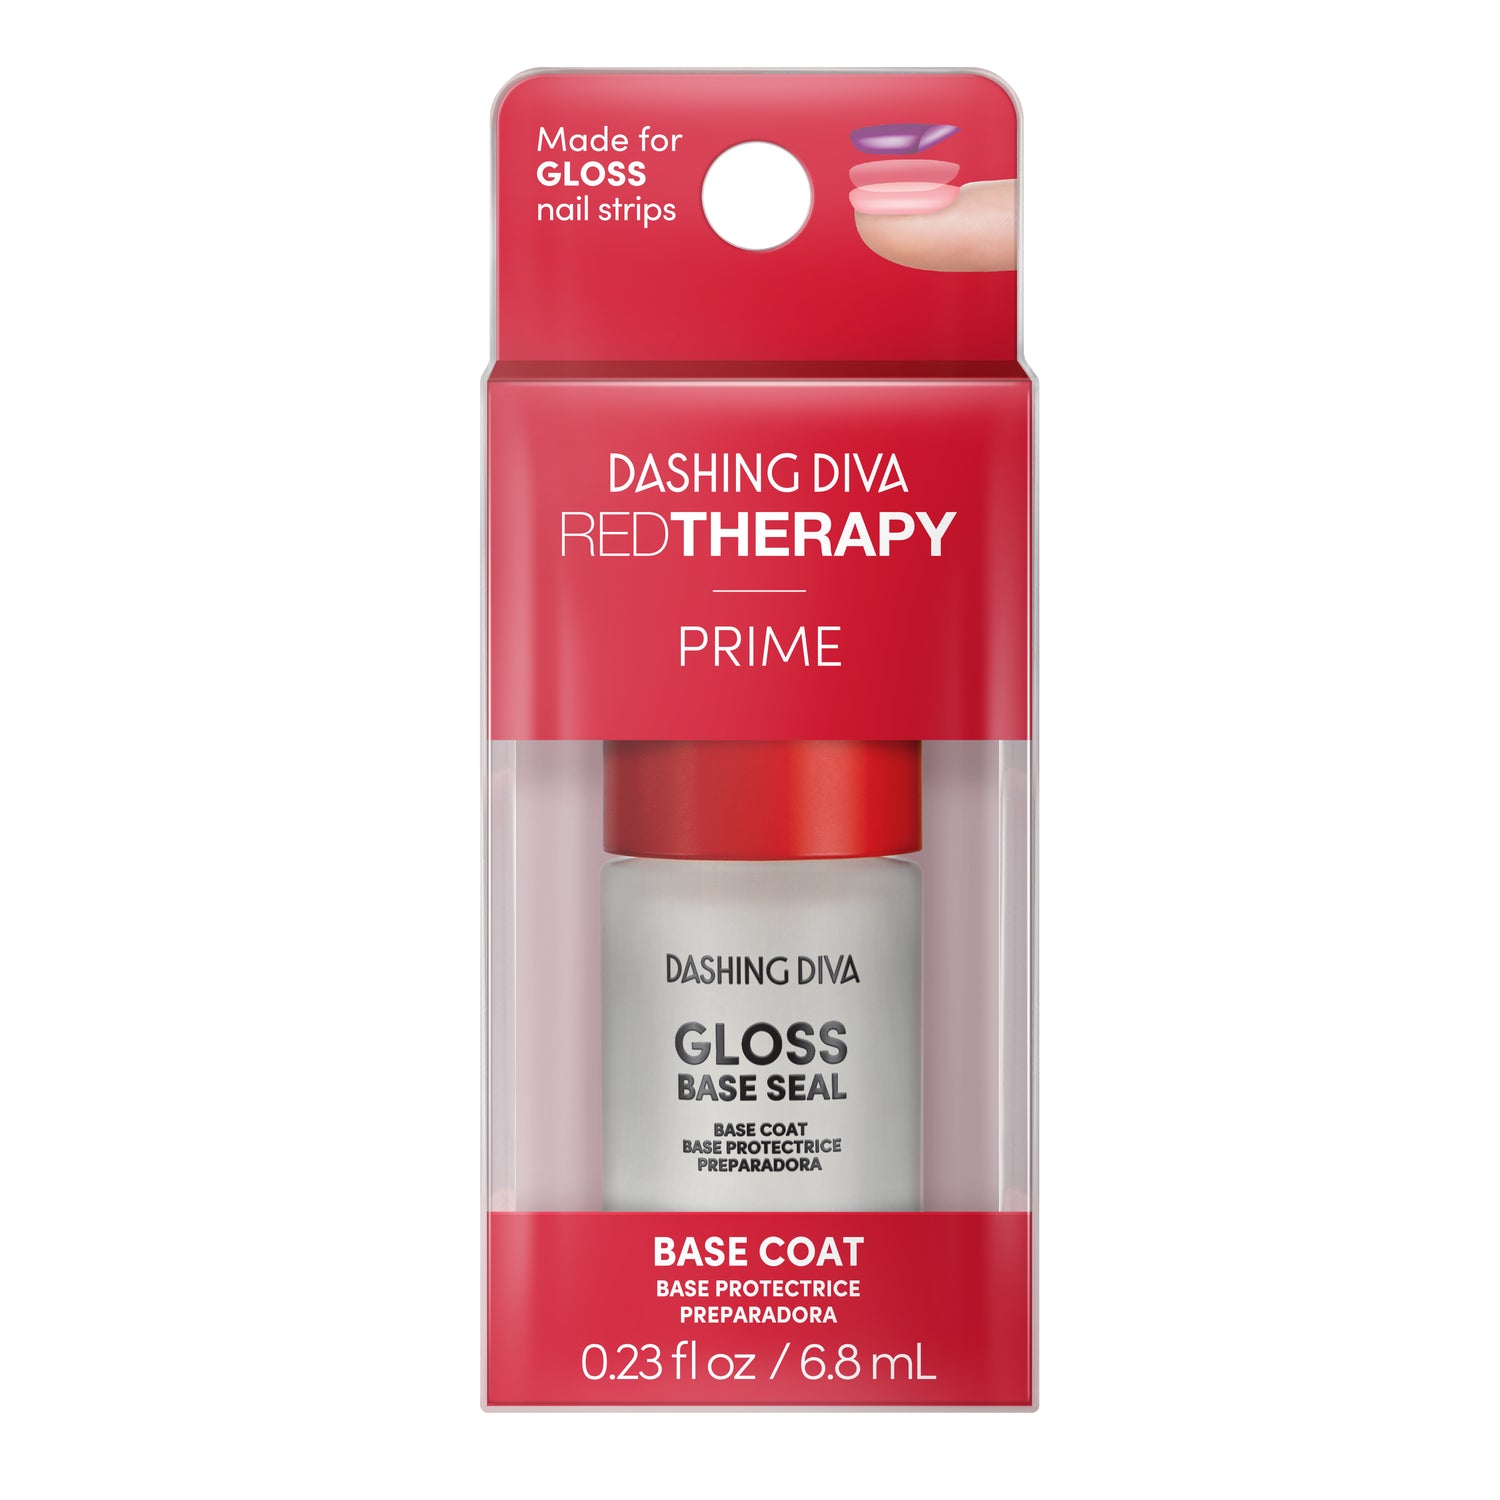 Dashing Diva Red Therapy Base Seal for GLOSS. Nail Primer.